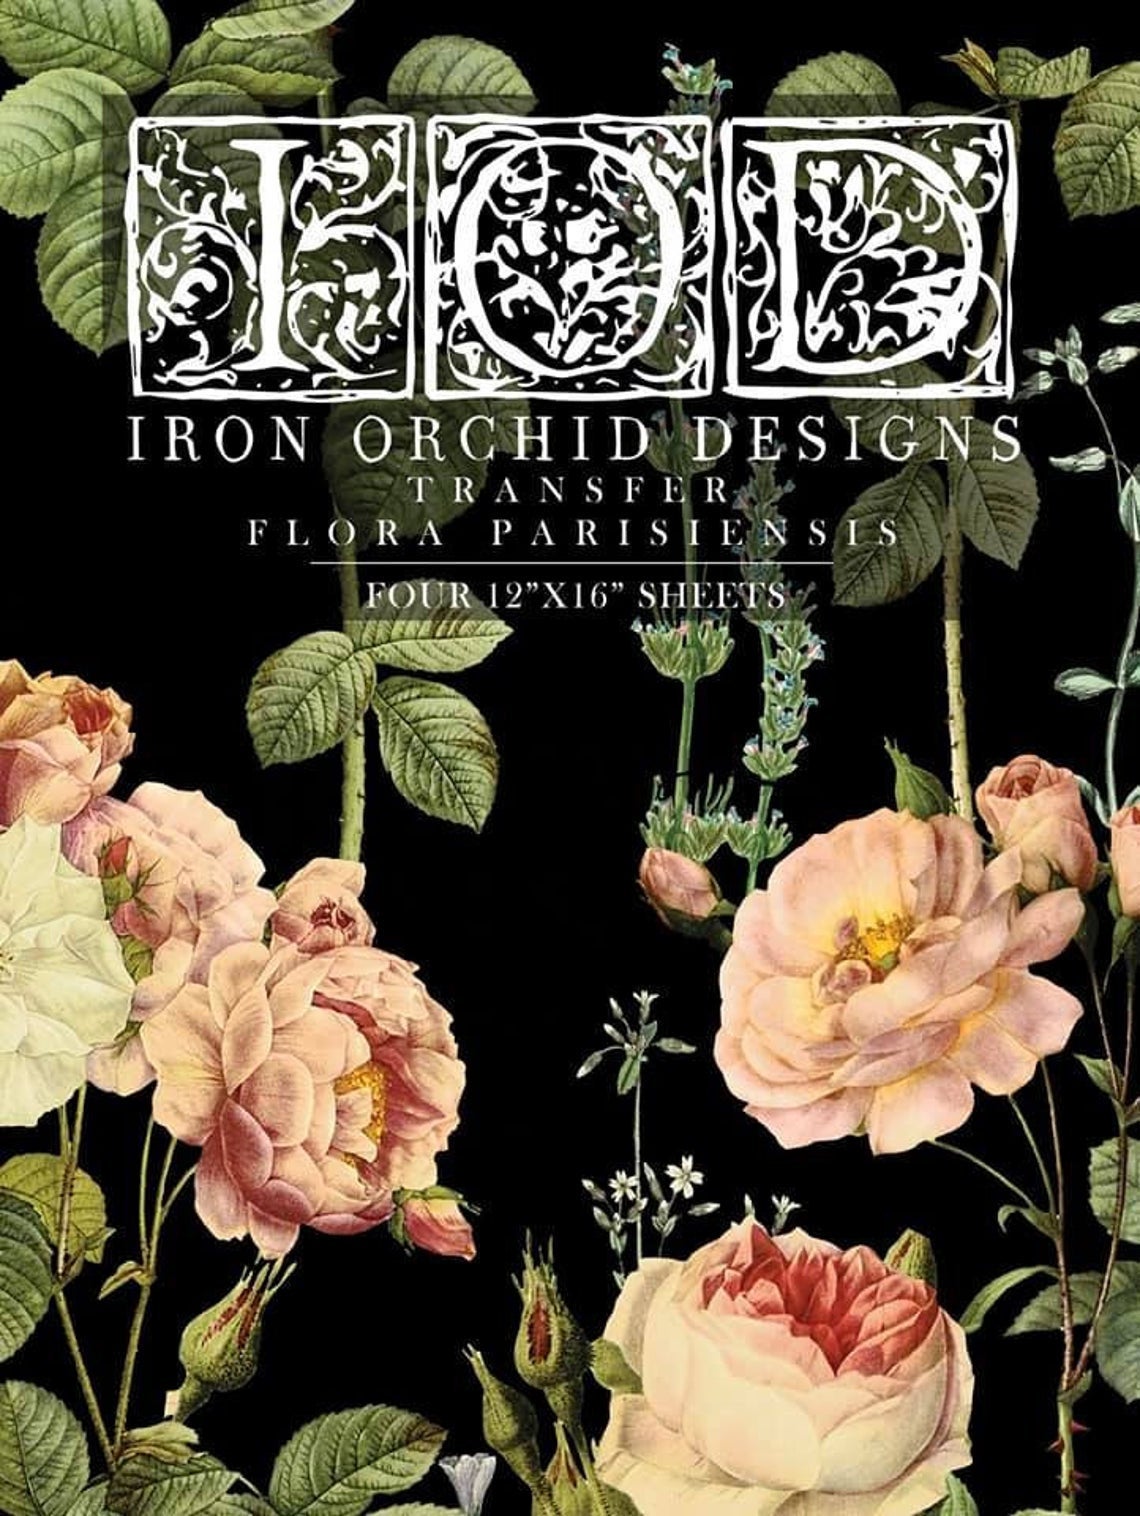 IOD transfer Floral Parisiensis Transfer pad with (4) 12 X 16 Sheets by Iron Orchid Designs Furniture transfer decal